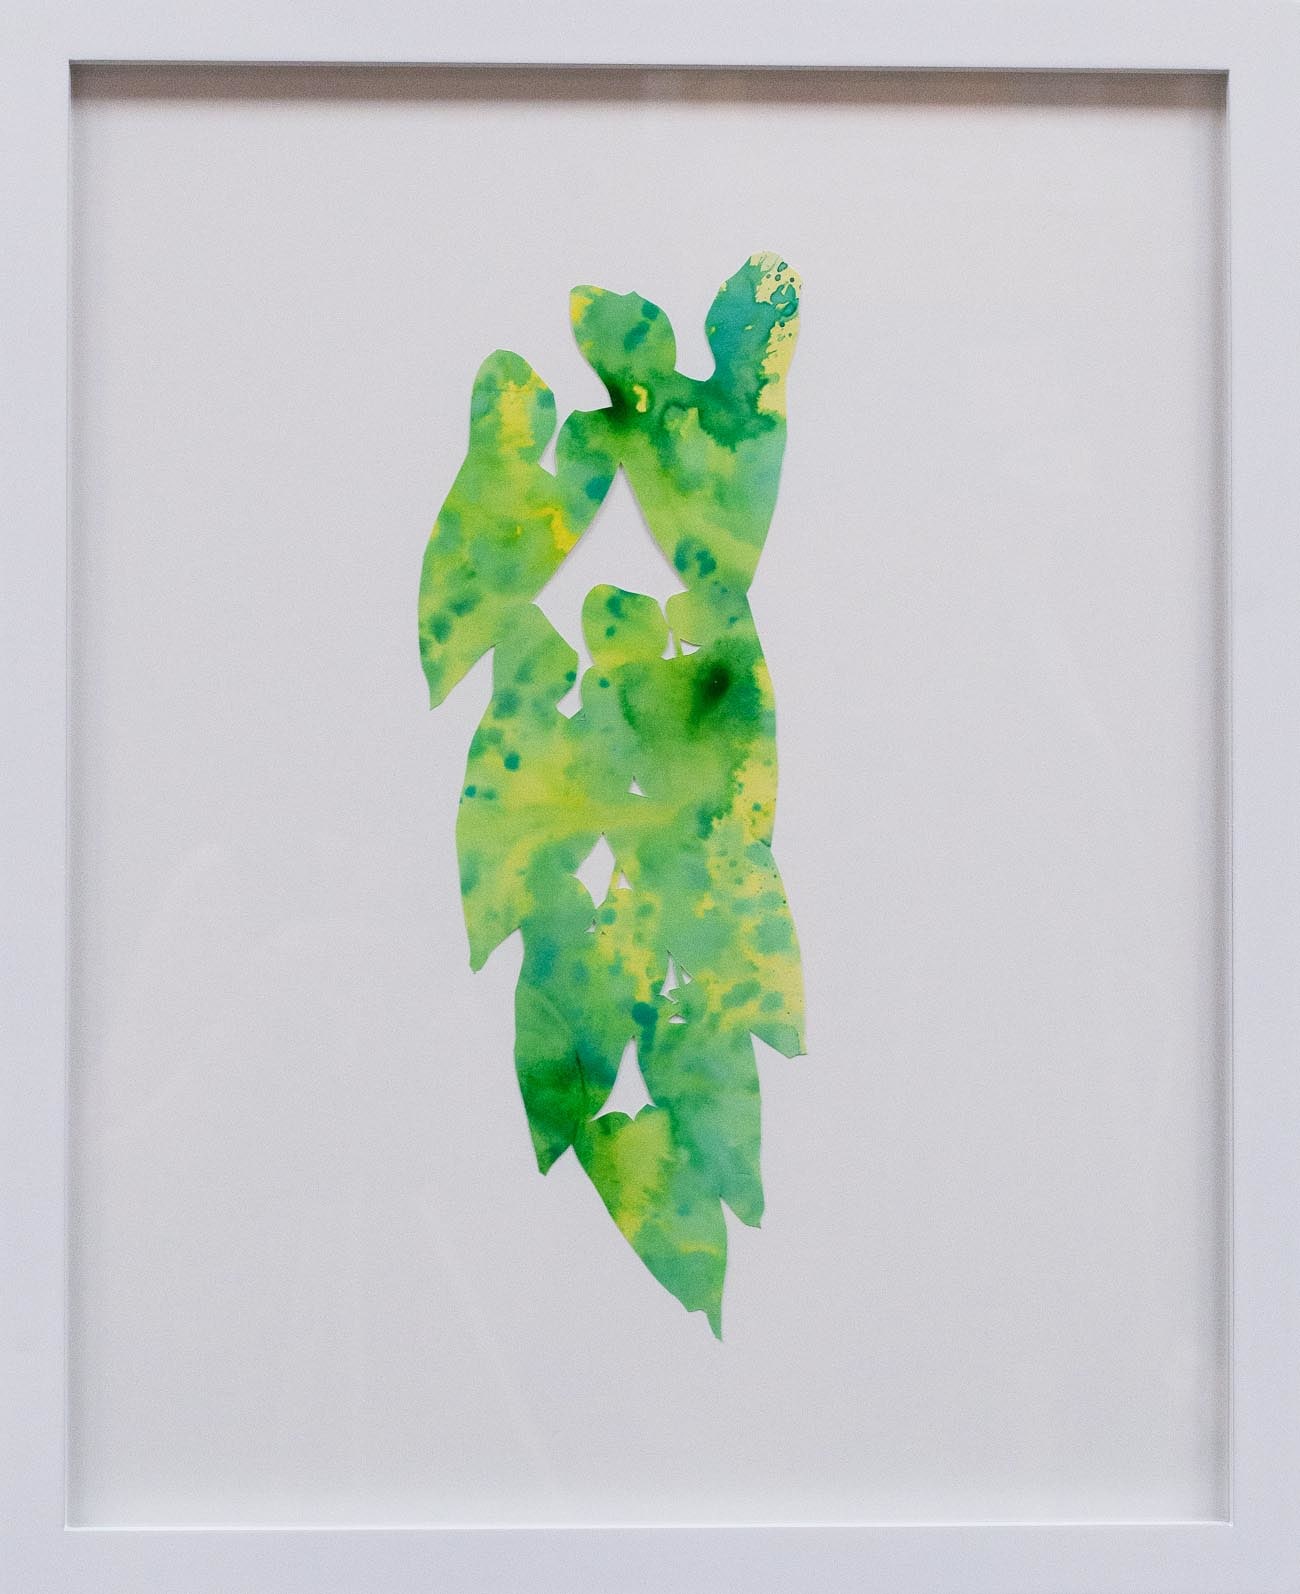 Hannah Cole  Smilax, 2018  watercolor on cut paper  Framed: 20h x 16w in 50.80h x 40.64w cm  HC_053